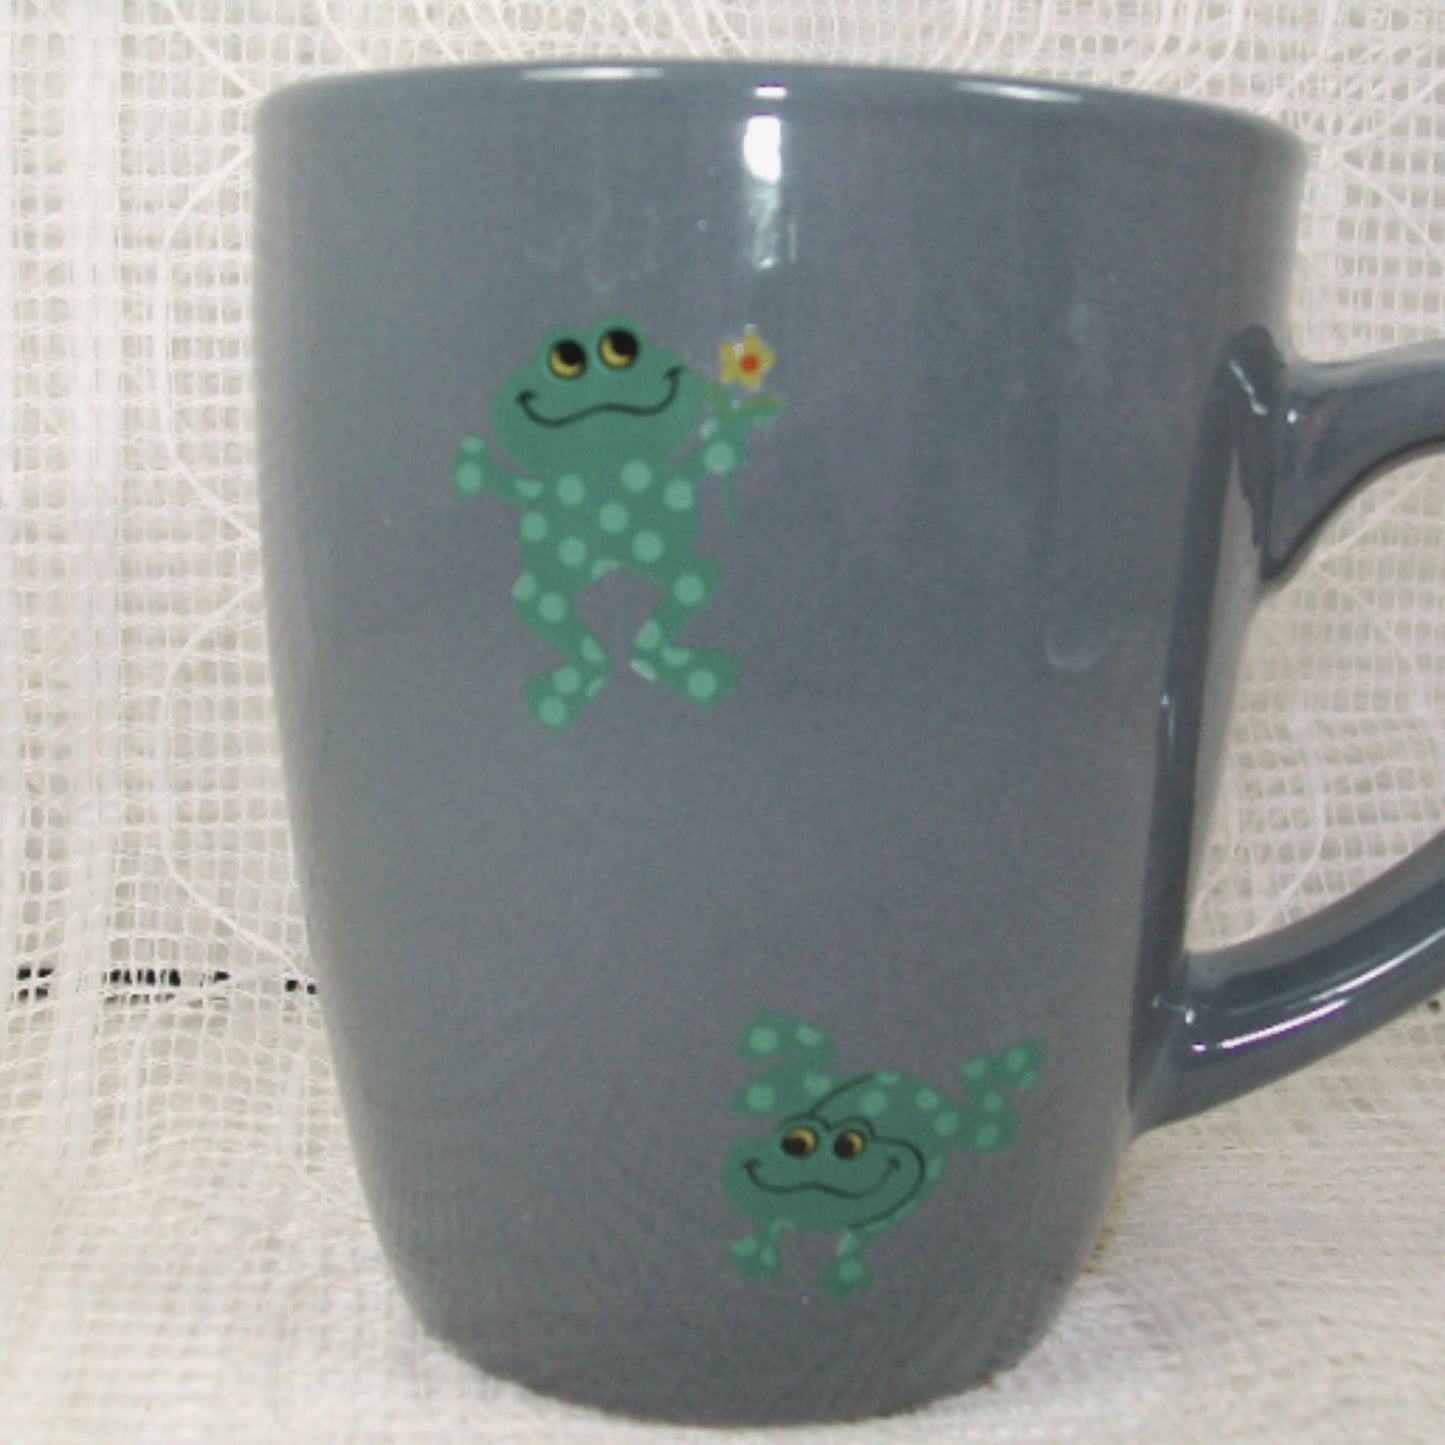 Frog Ceramic Coffee Mug / Gray Coffee Cup With Frogs / Unique Coffee Mug / Beverage Container  / Frog Decor / Gift for Frog Lover / Tea Mug